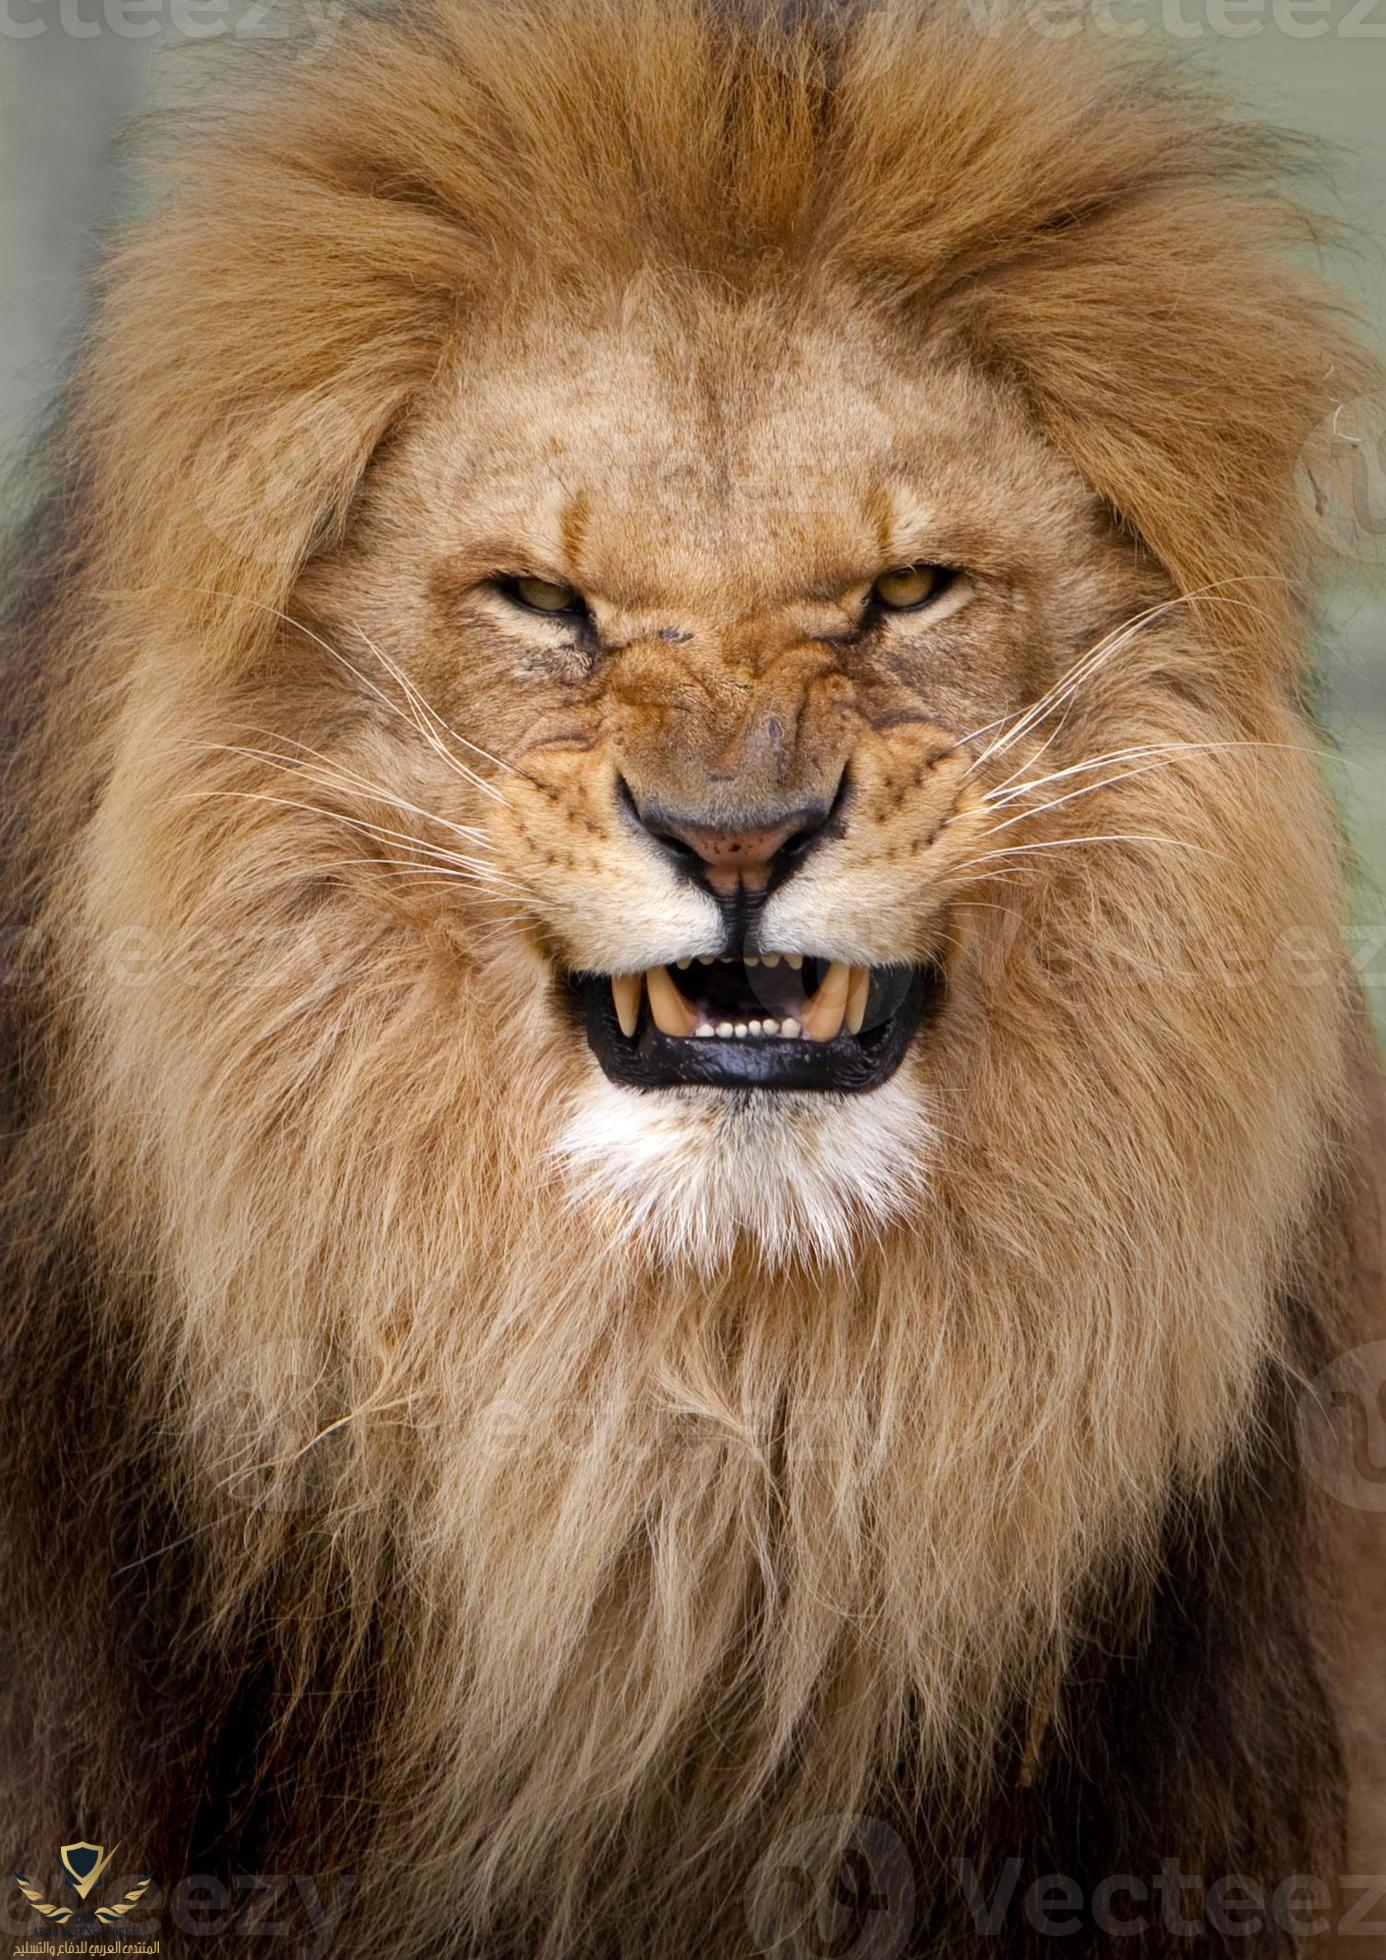 portrait-of-an-angry-lion-photo.jpg